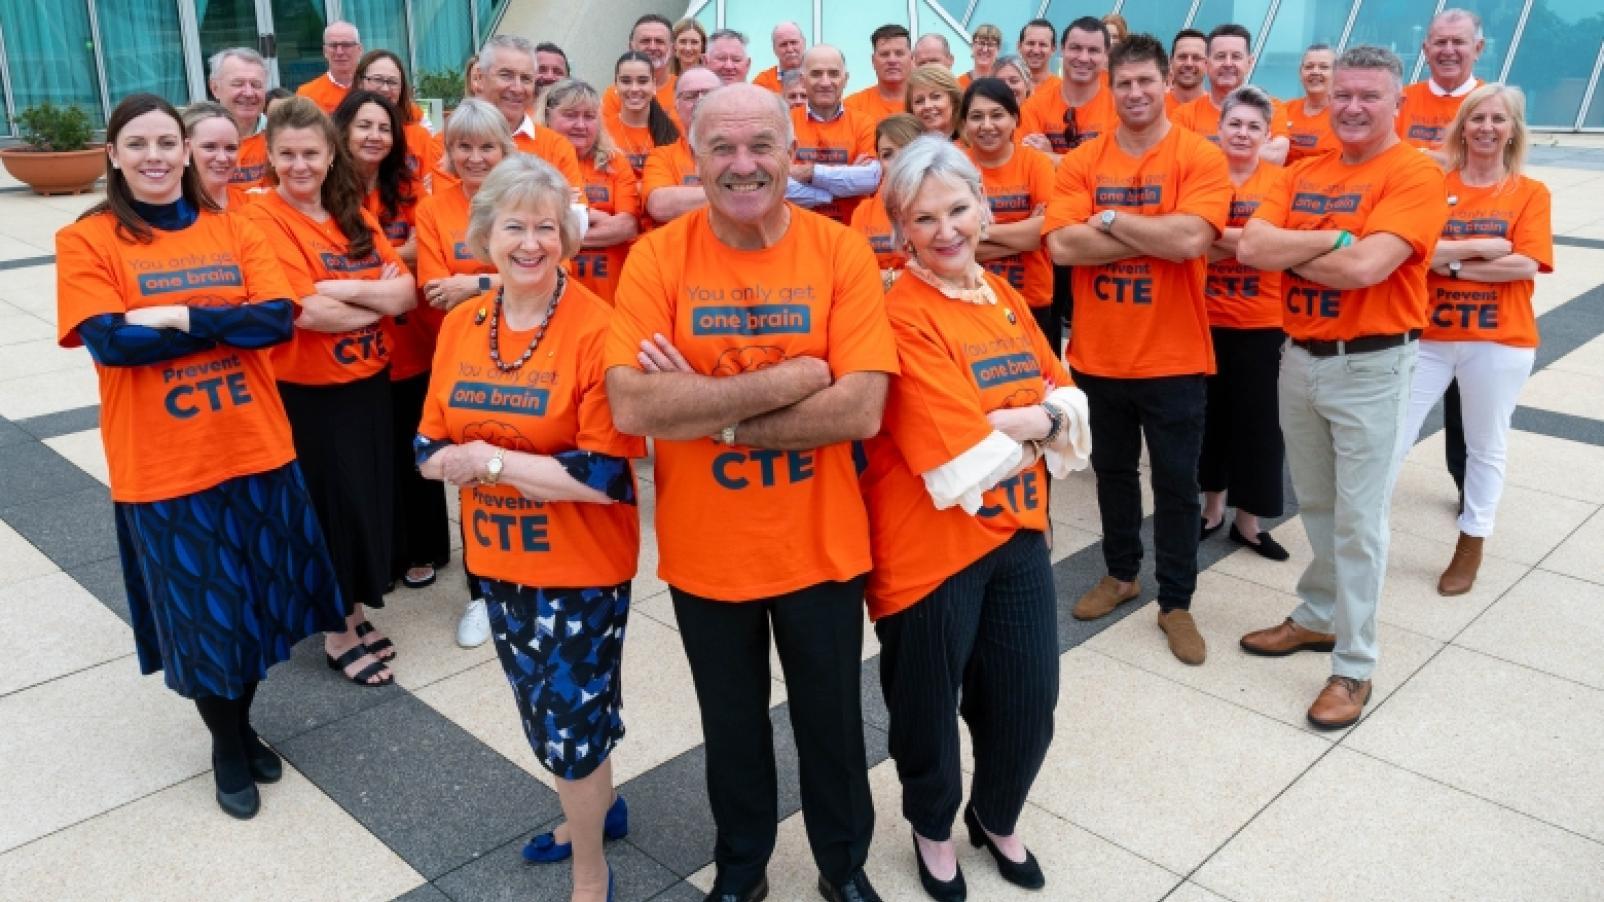 Advocates at Parliamentary Friends of Dementia event in February 2024, wearing orange t-shirts to promote CTE awareness.